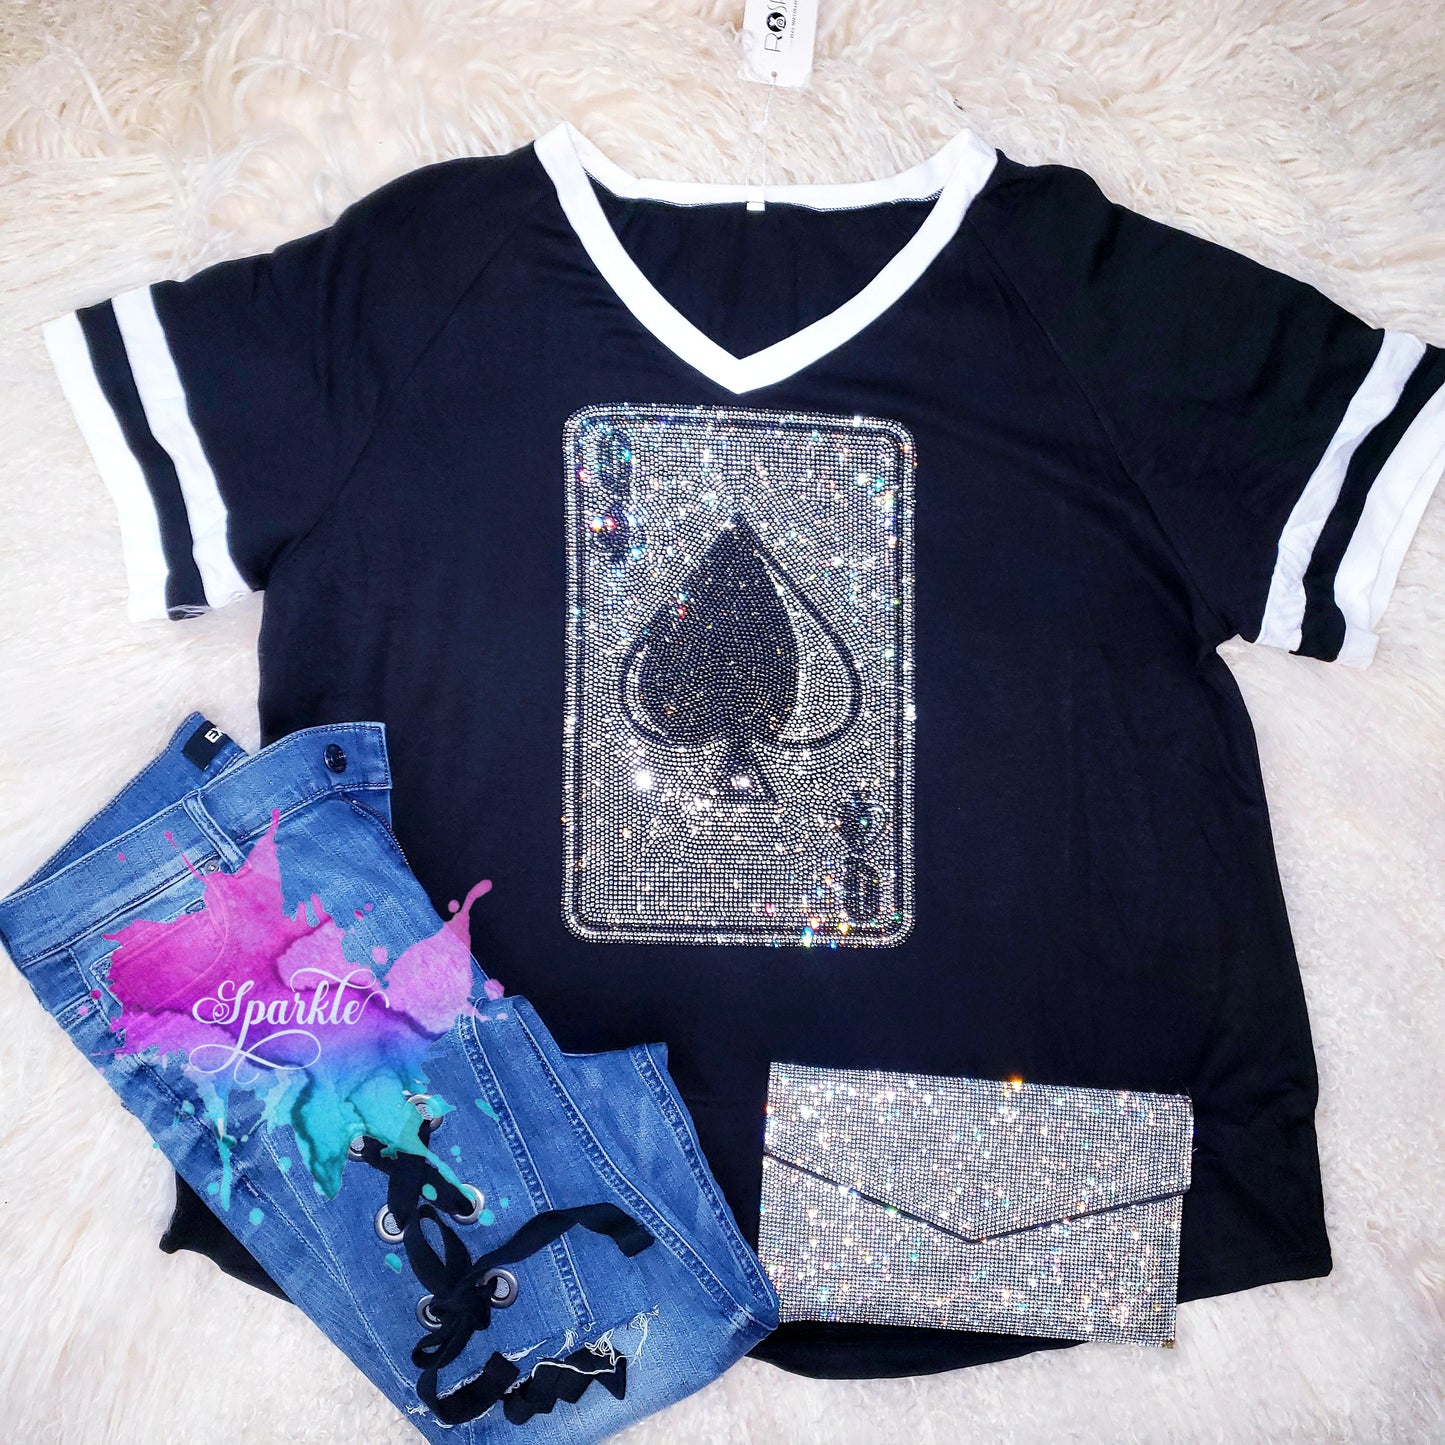 Queen of Spades Crystallized Tee